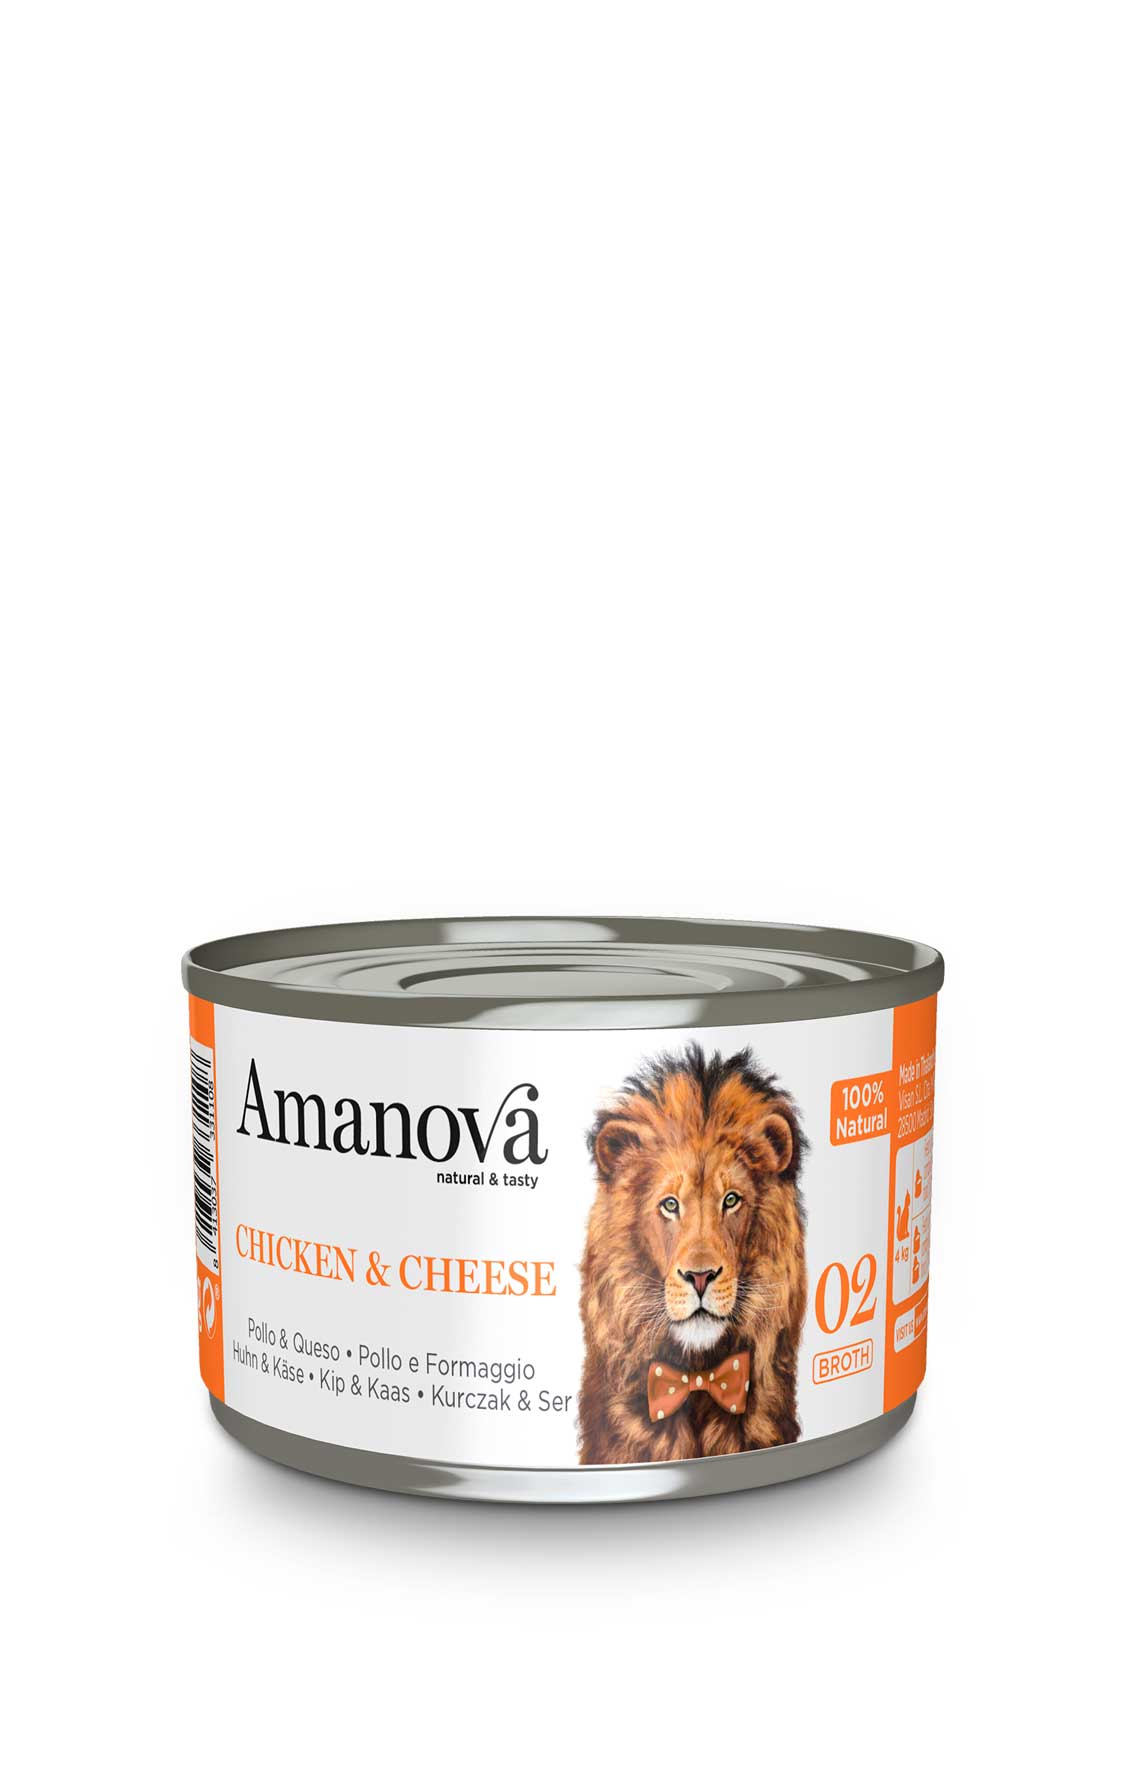 Amanova Canned Cat Chicken & Cheese Broth - 70g